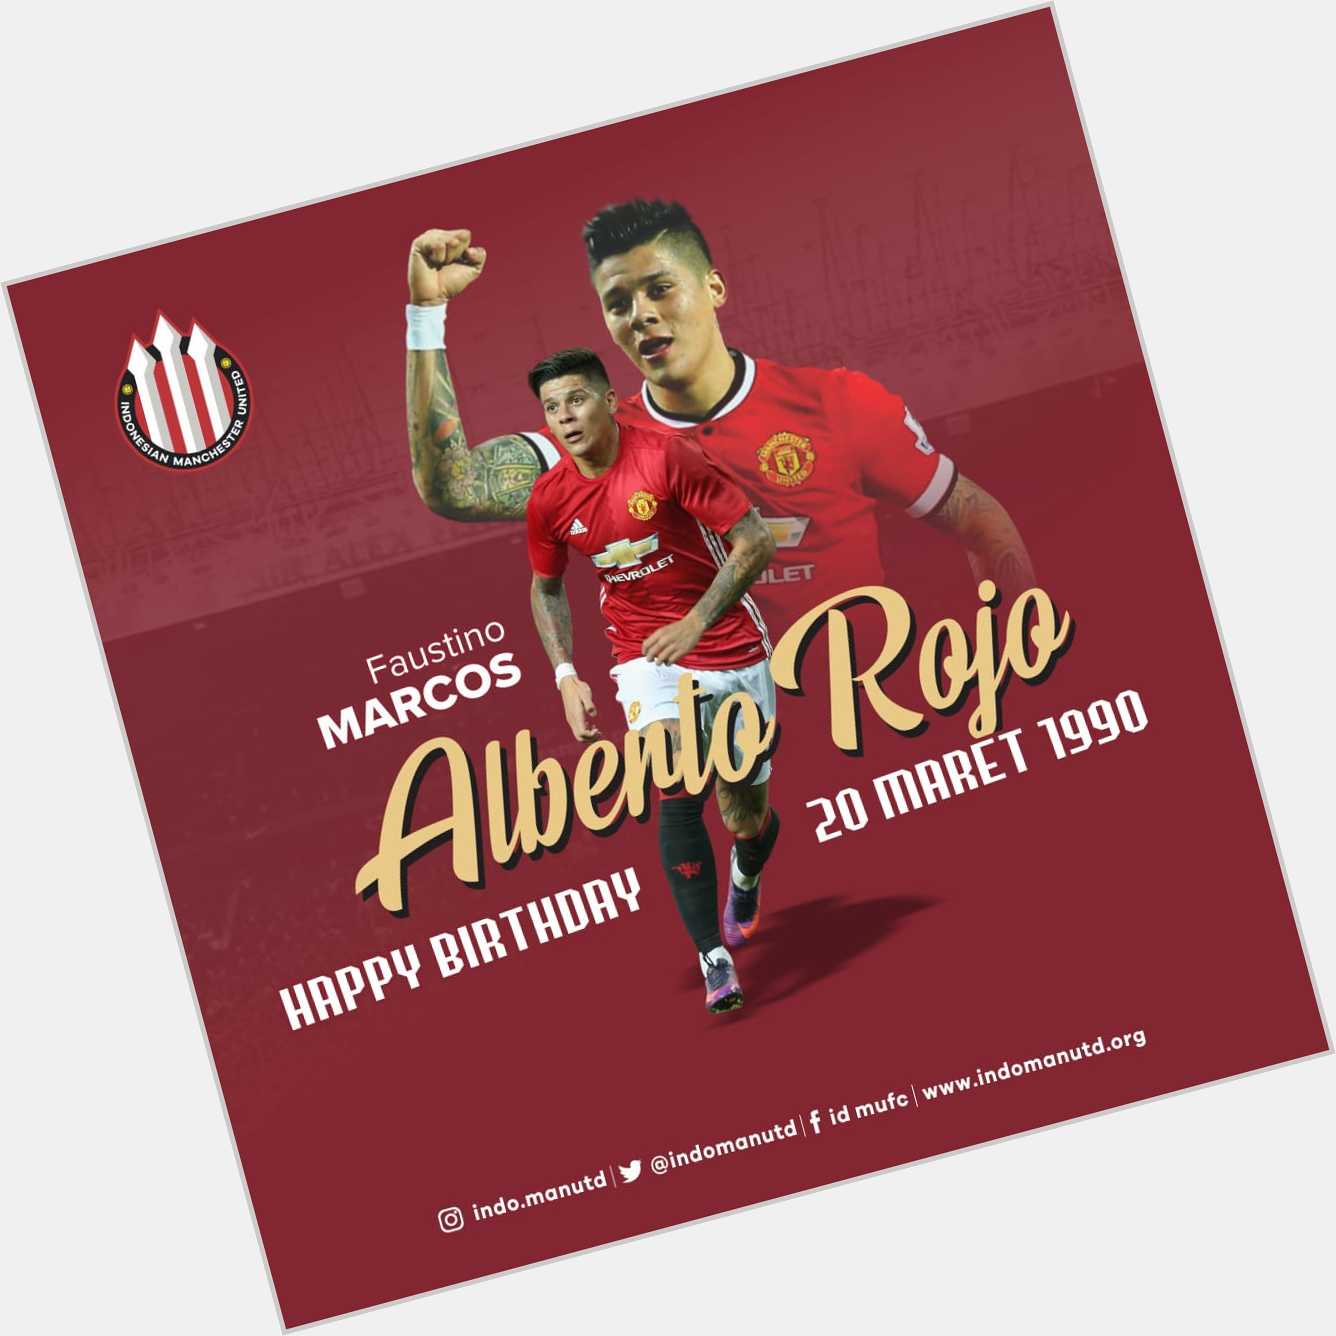 Happy Birthday Marcos Rojo...
Have a Great Day 